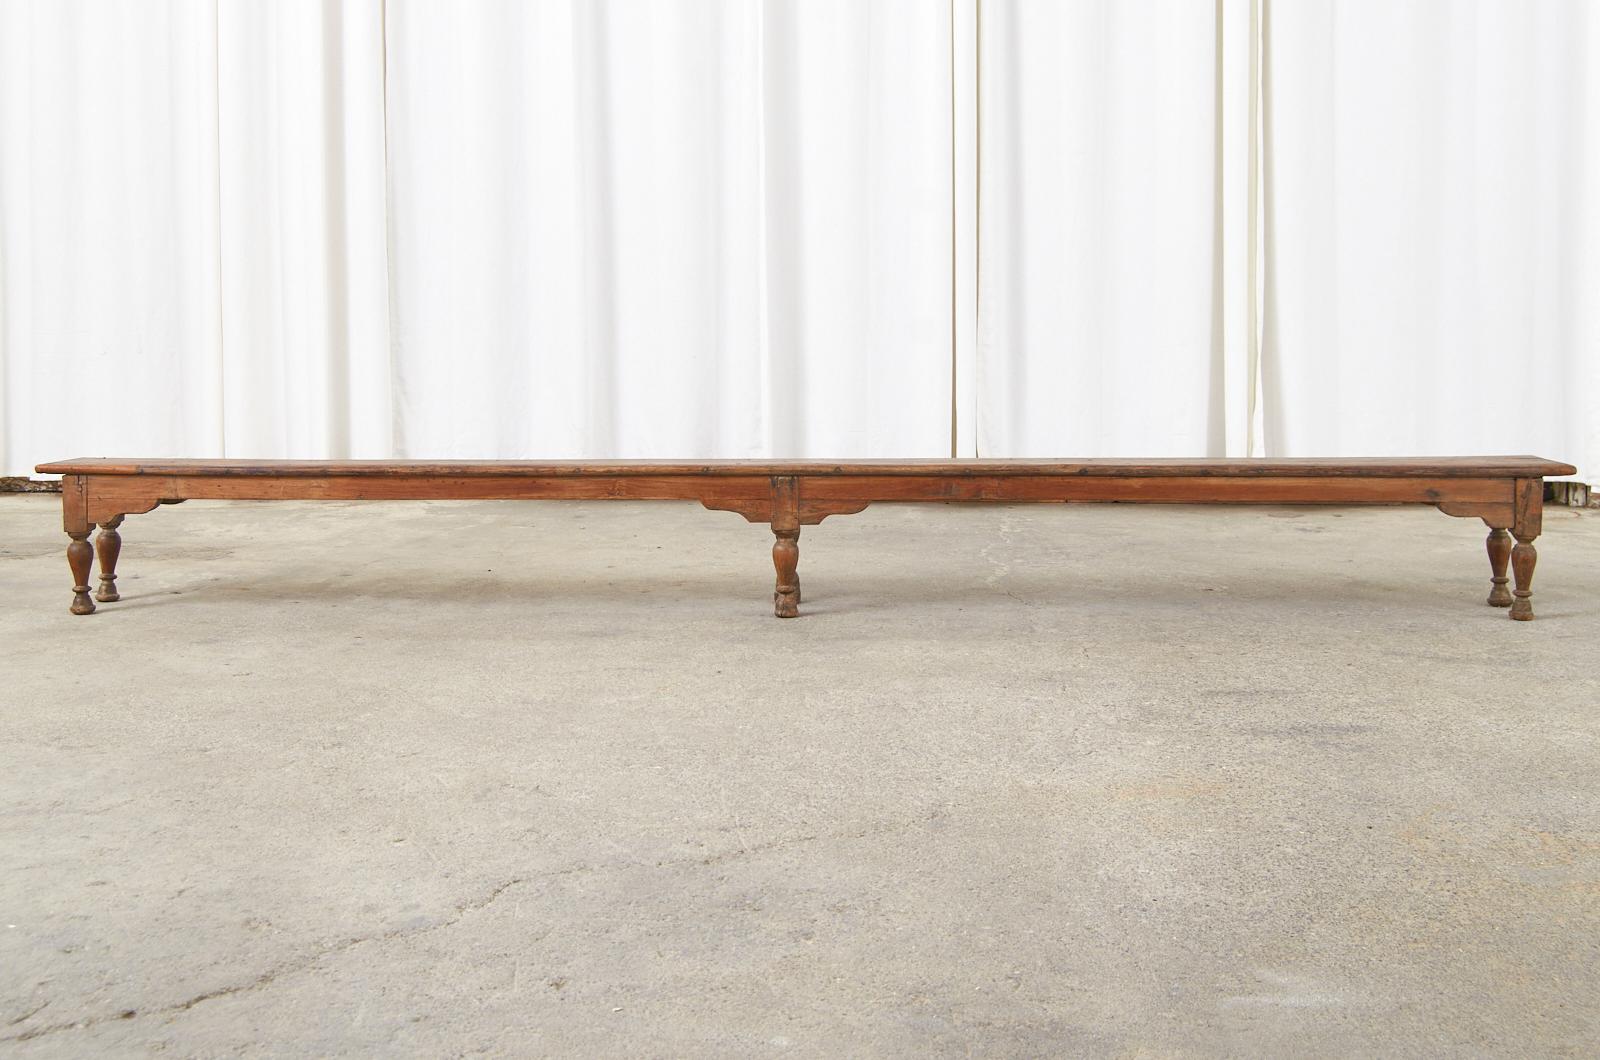 Monumental 19th century low display table, console table, or bench measuring over 10 feet long. British Colonial handcrafted from hardwood including teak. The long plank top has breadboard ends and is supported by turned legs ending with bell shaped